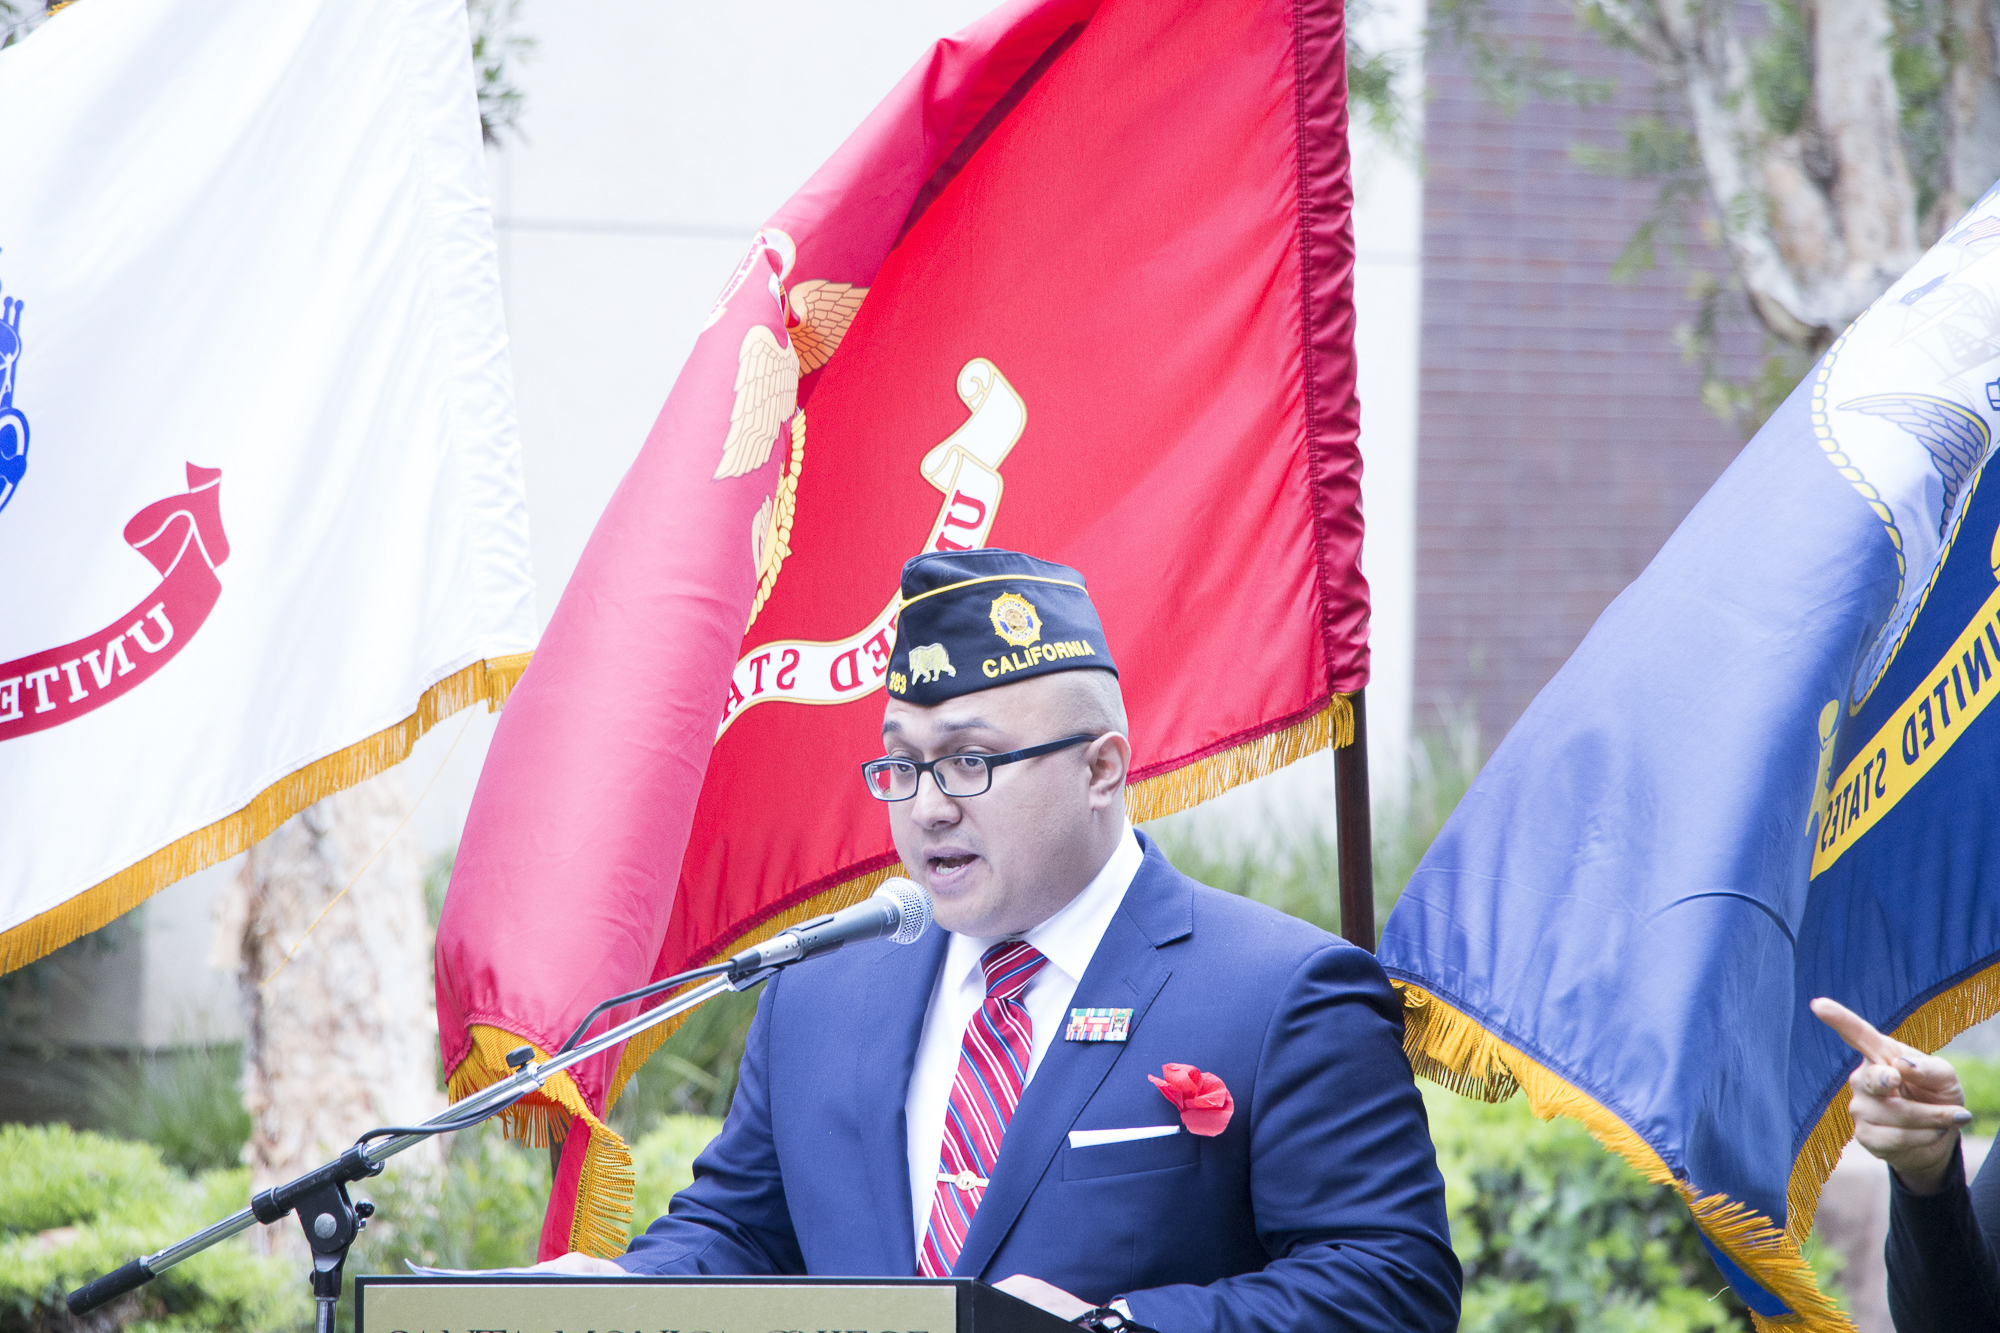  Glen Pena,, a Marine veteran speaks about those who have lost thier lives in the line of duty at Santa Monica College's Memorial Day Commemoration on Thursday, May 24, 2018 in Santa Monica, California. (Wilson Gomez/Corsair Photo) 